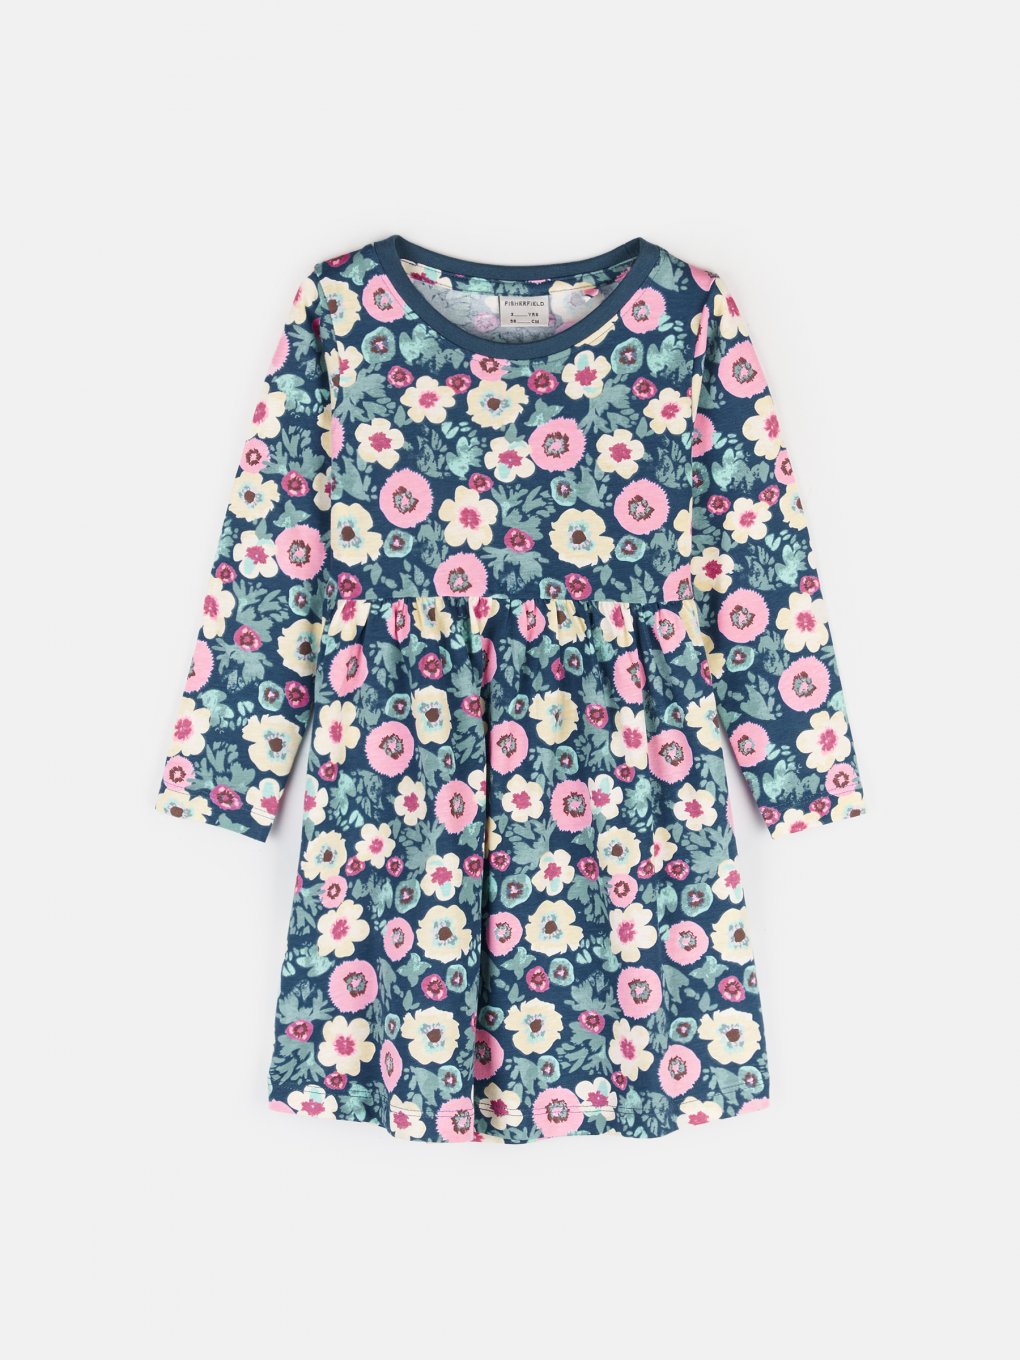 Cotton dress with floral print